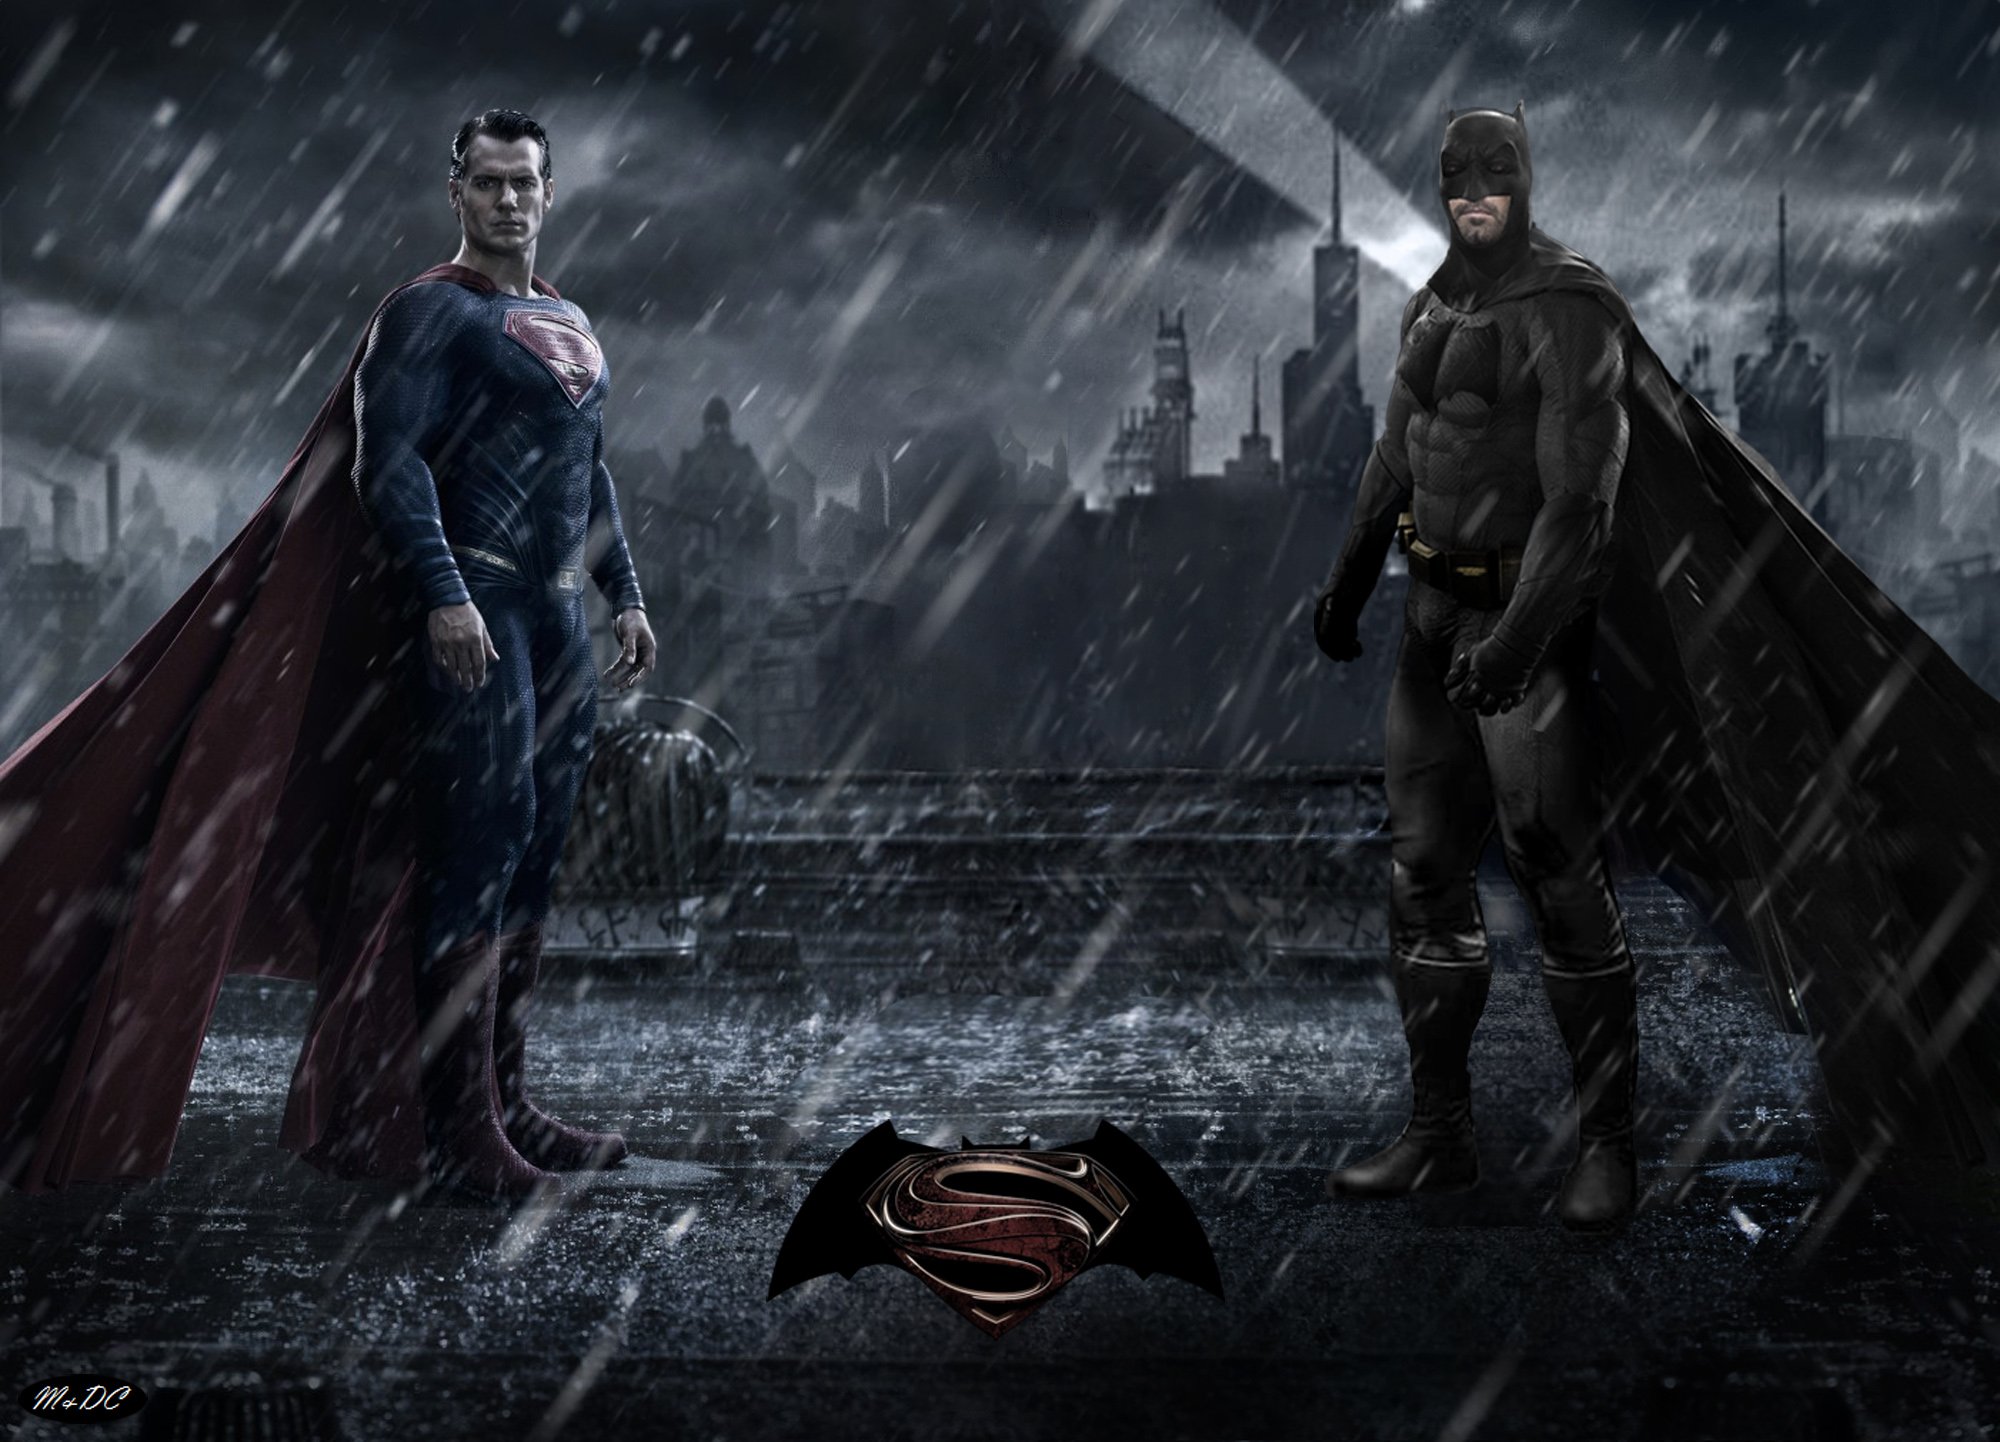 Free Download Batman V Superman Dawn Of Justice Wallpaper Amazing Images R51ki062 00x1442 For Your Desktop Mobile Tablet Explore 50 Batman V Superman Dawn Of Justice Wallpaper Batman V